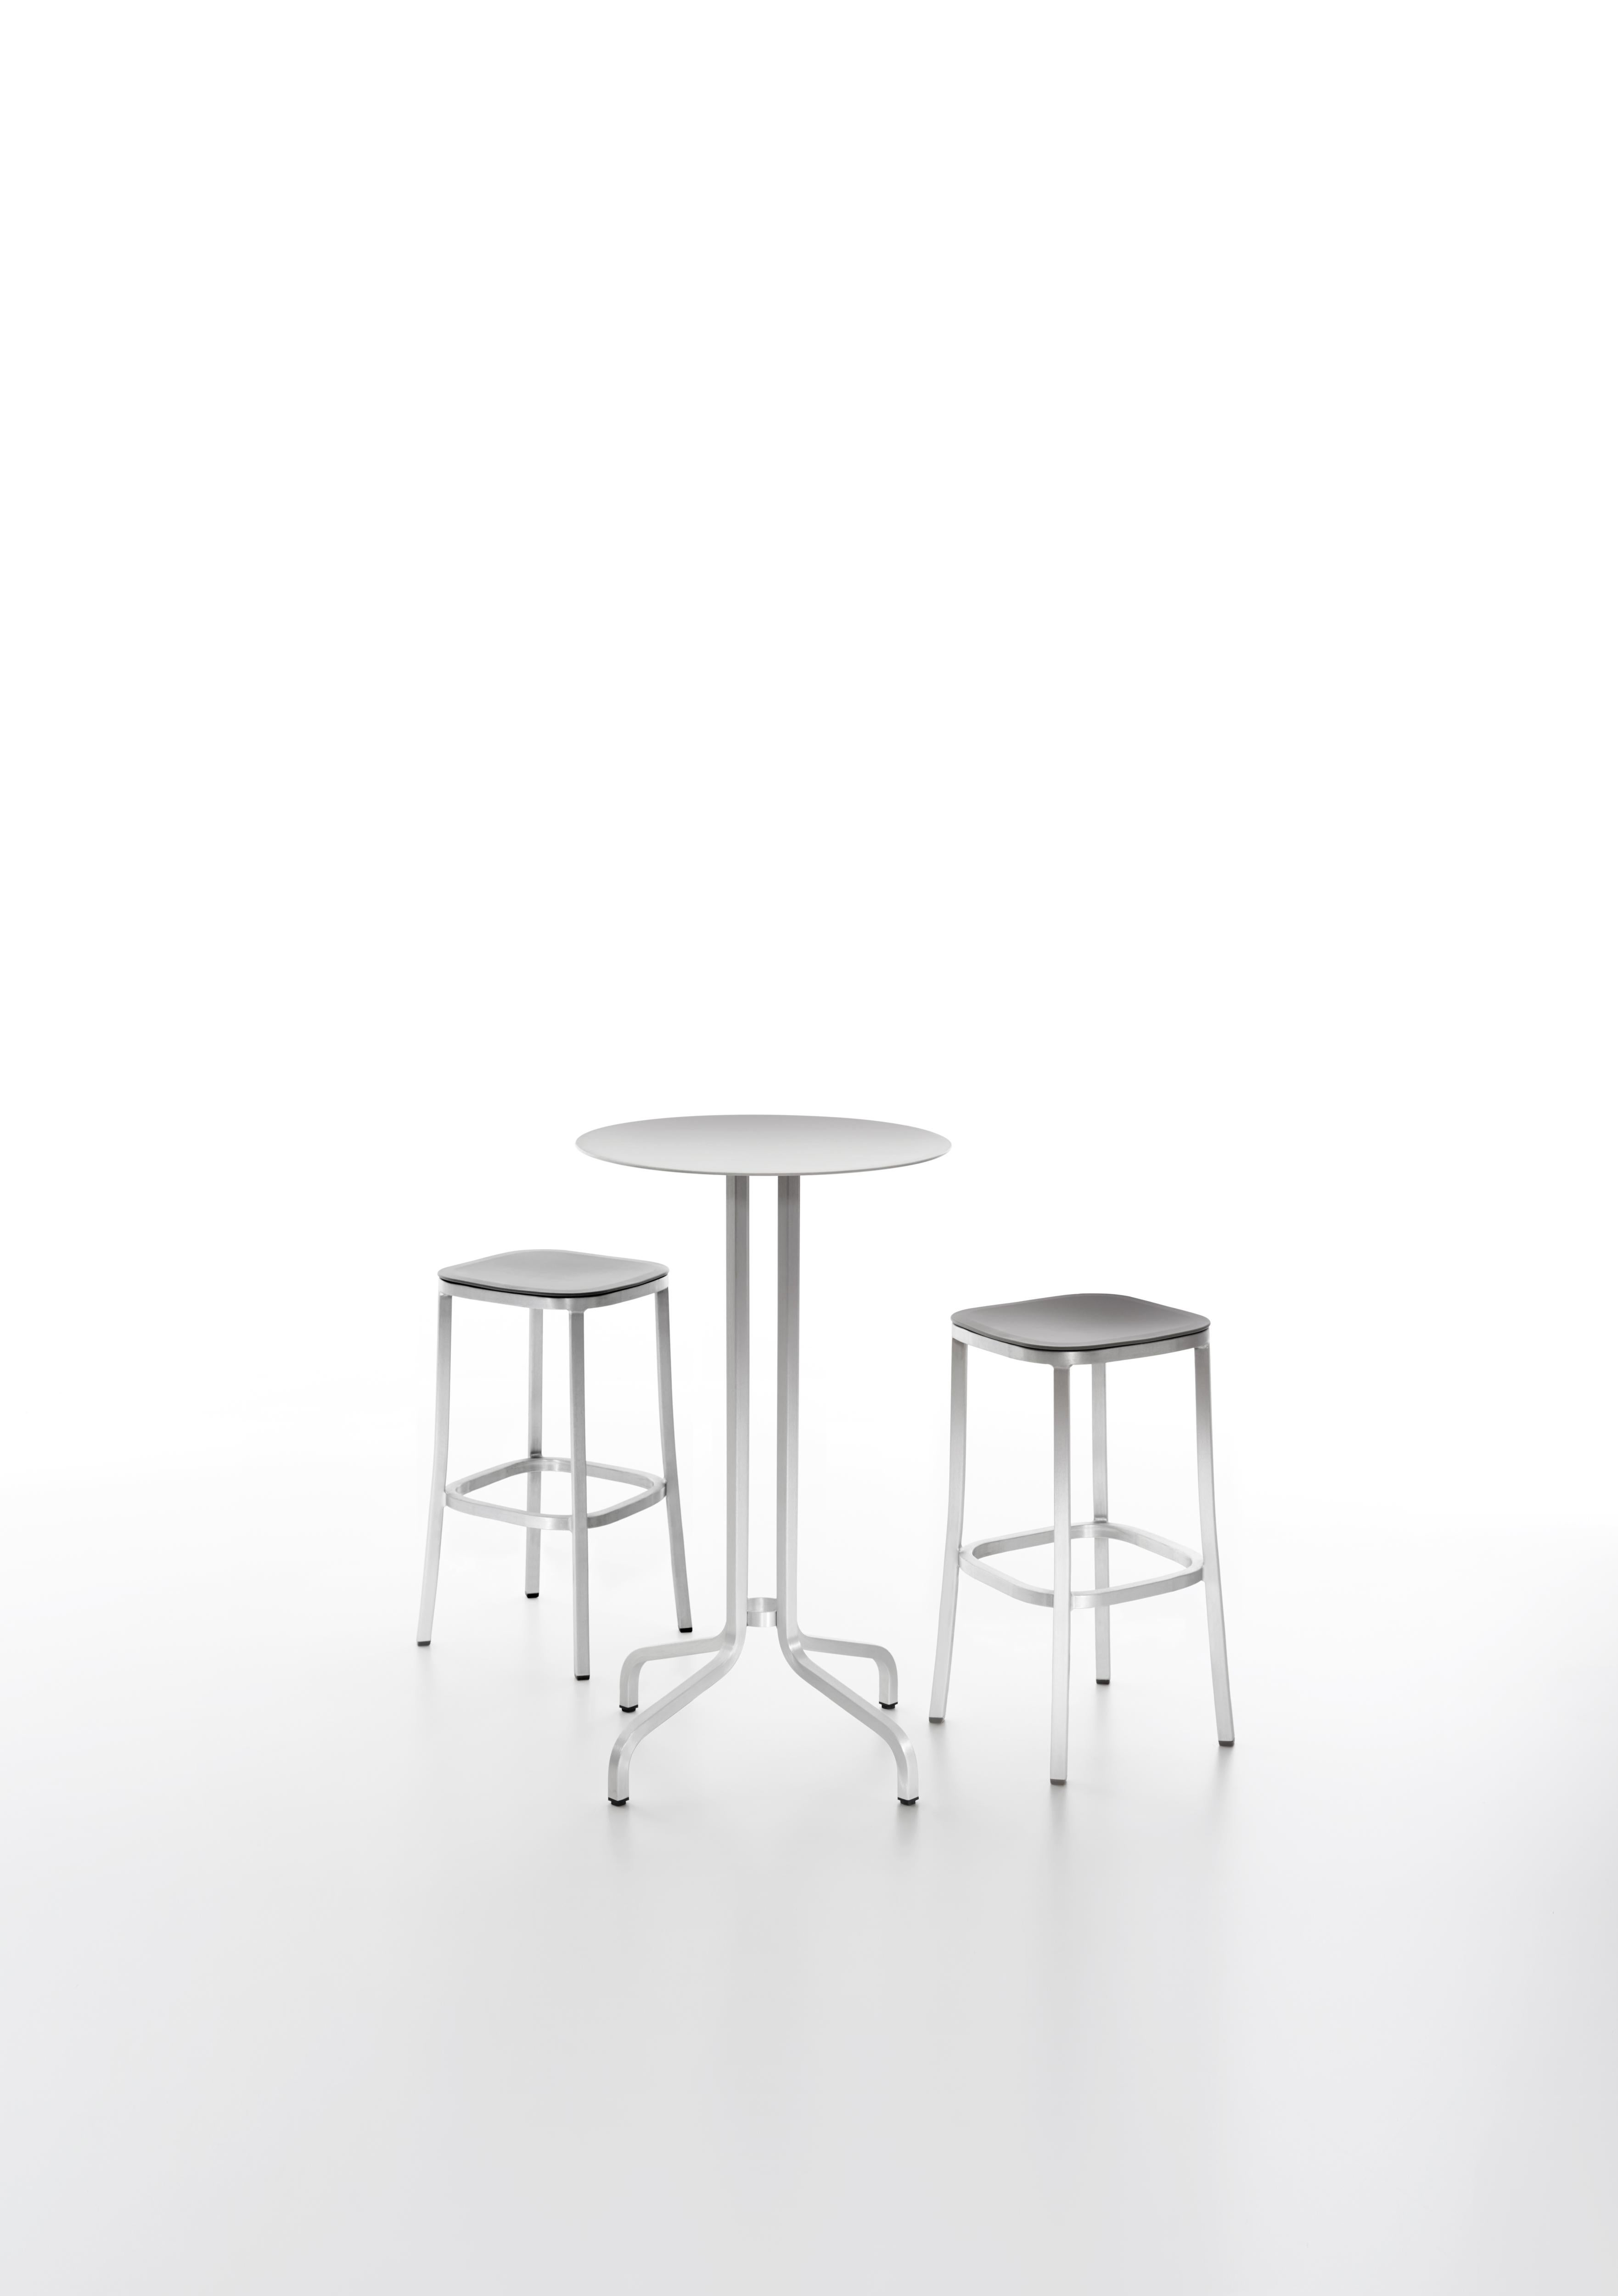 Emeco 1 Inch Small Stool in Brushed Aluminium and Walnut by Jasper Morrison In New Condition For Sale In Hanover, PA